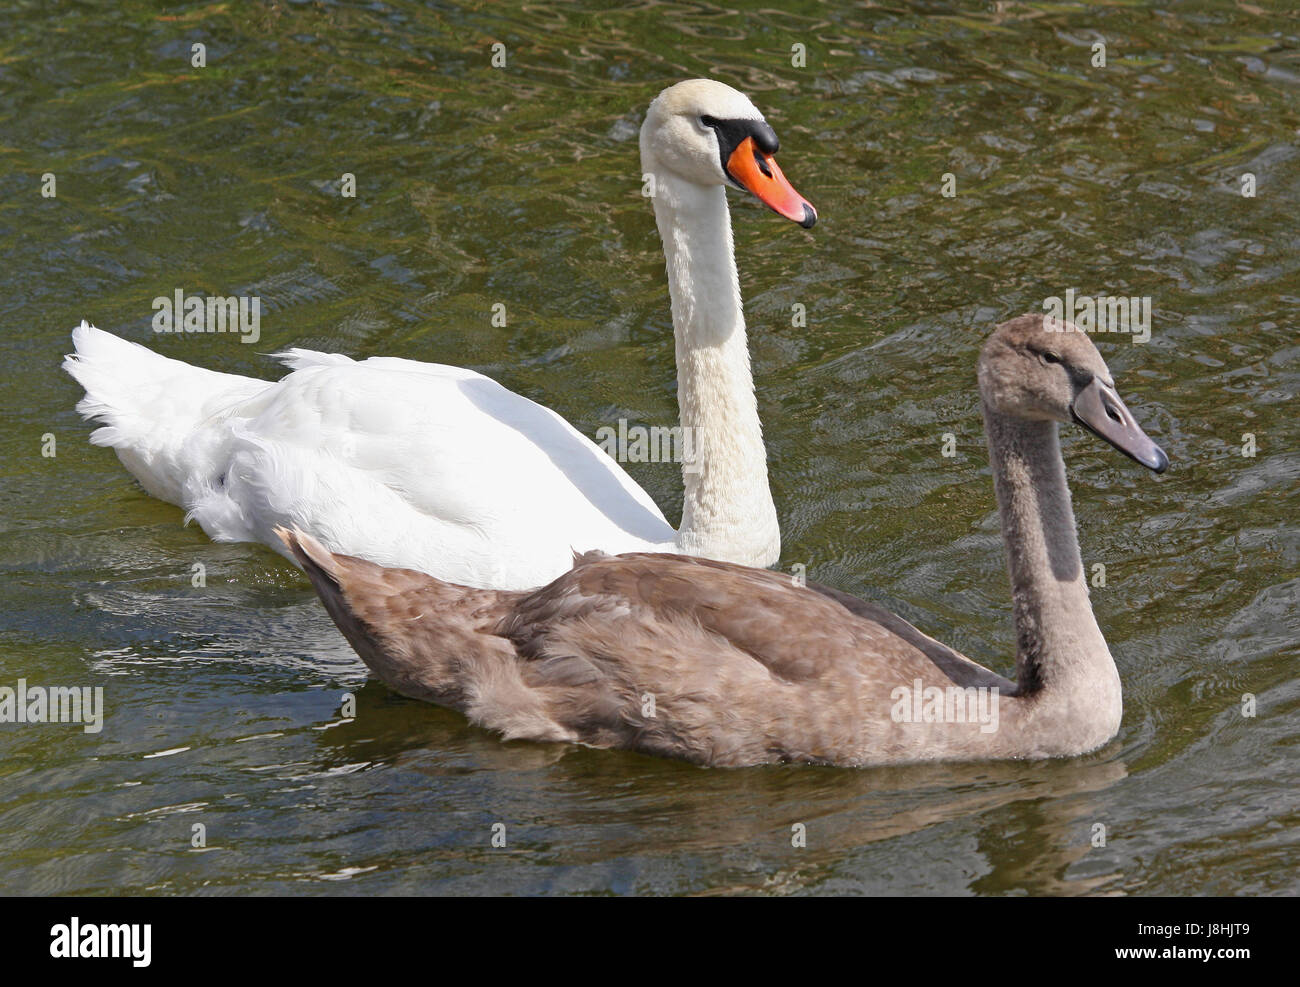 bird, animals, swan, birds, outing, community, love, in love, fell in love, Stock Photo